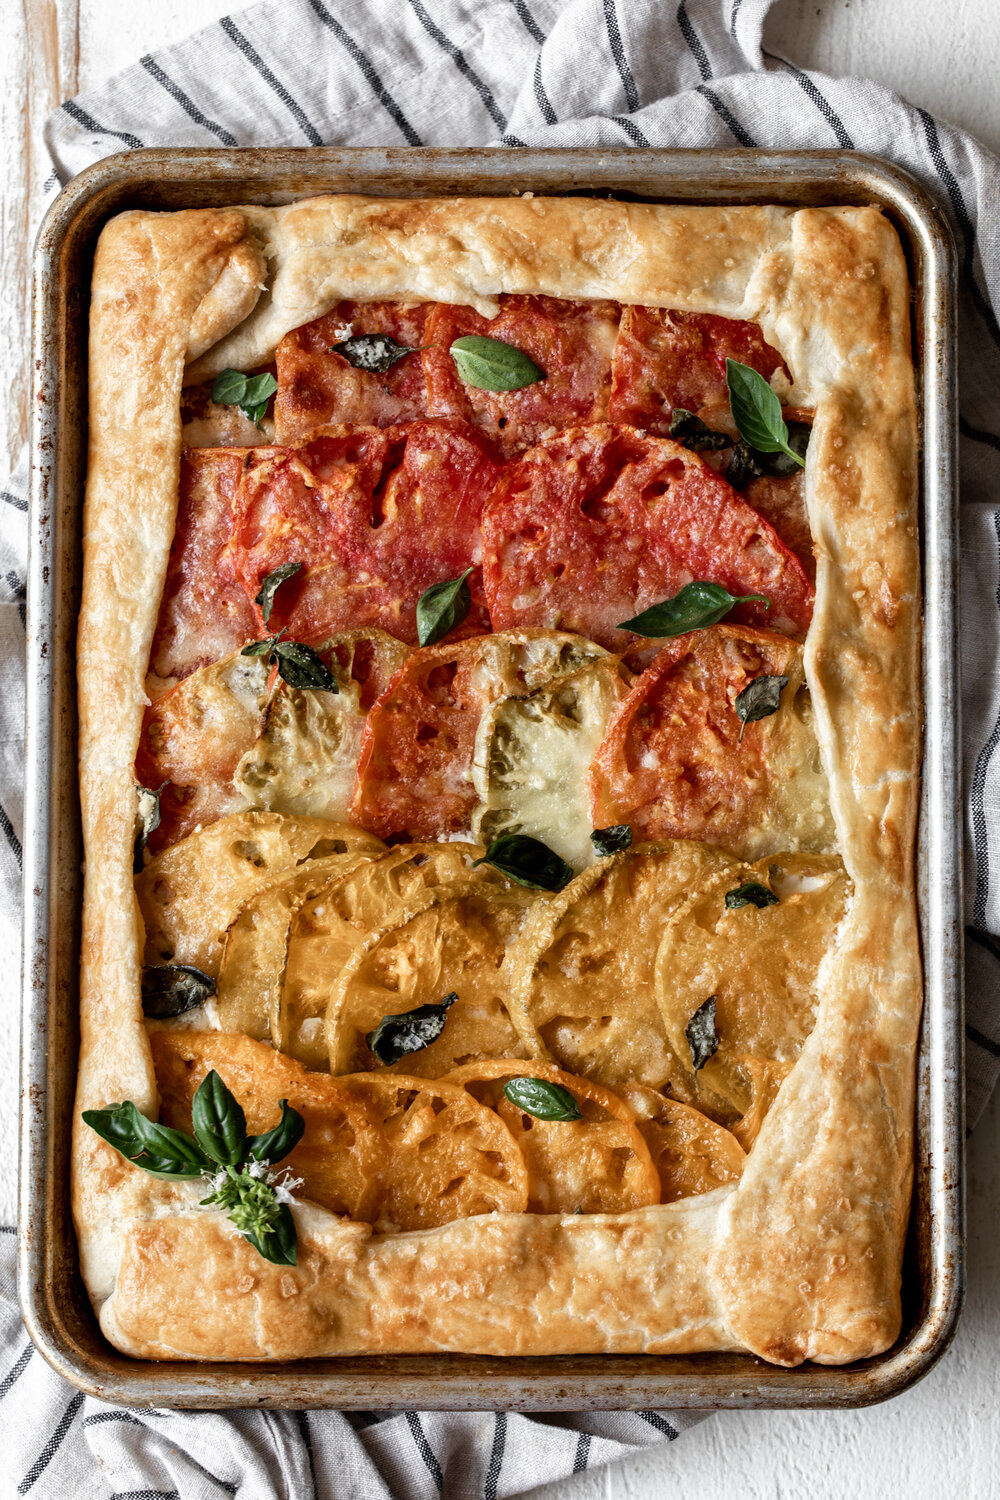 Heirloom Tomato Galette with Caramelized Onions & Ricotta baked